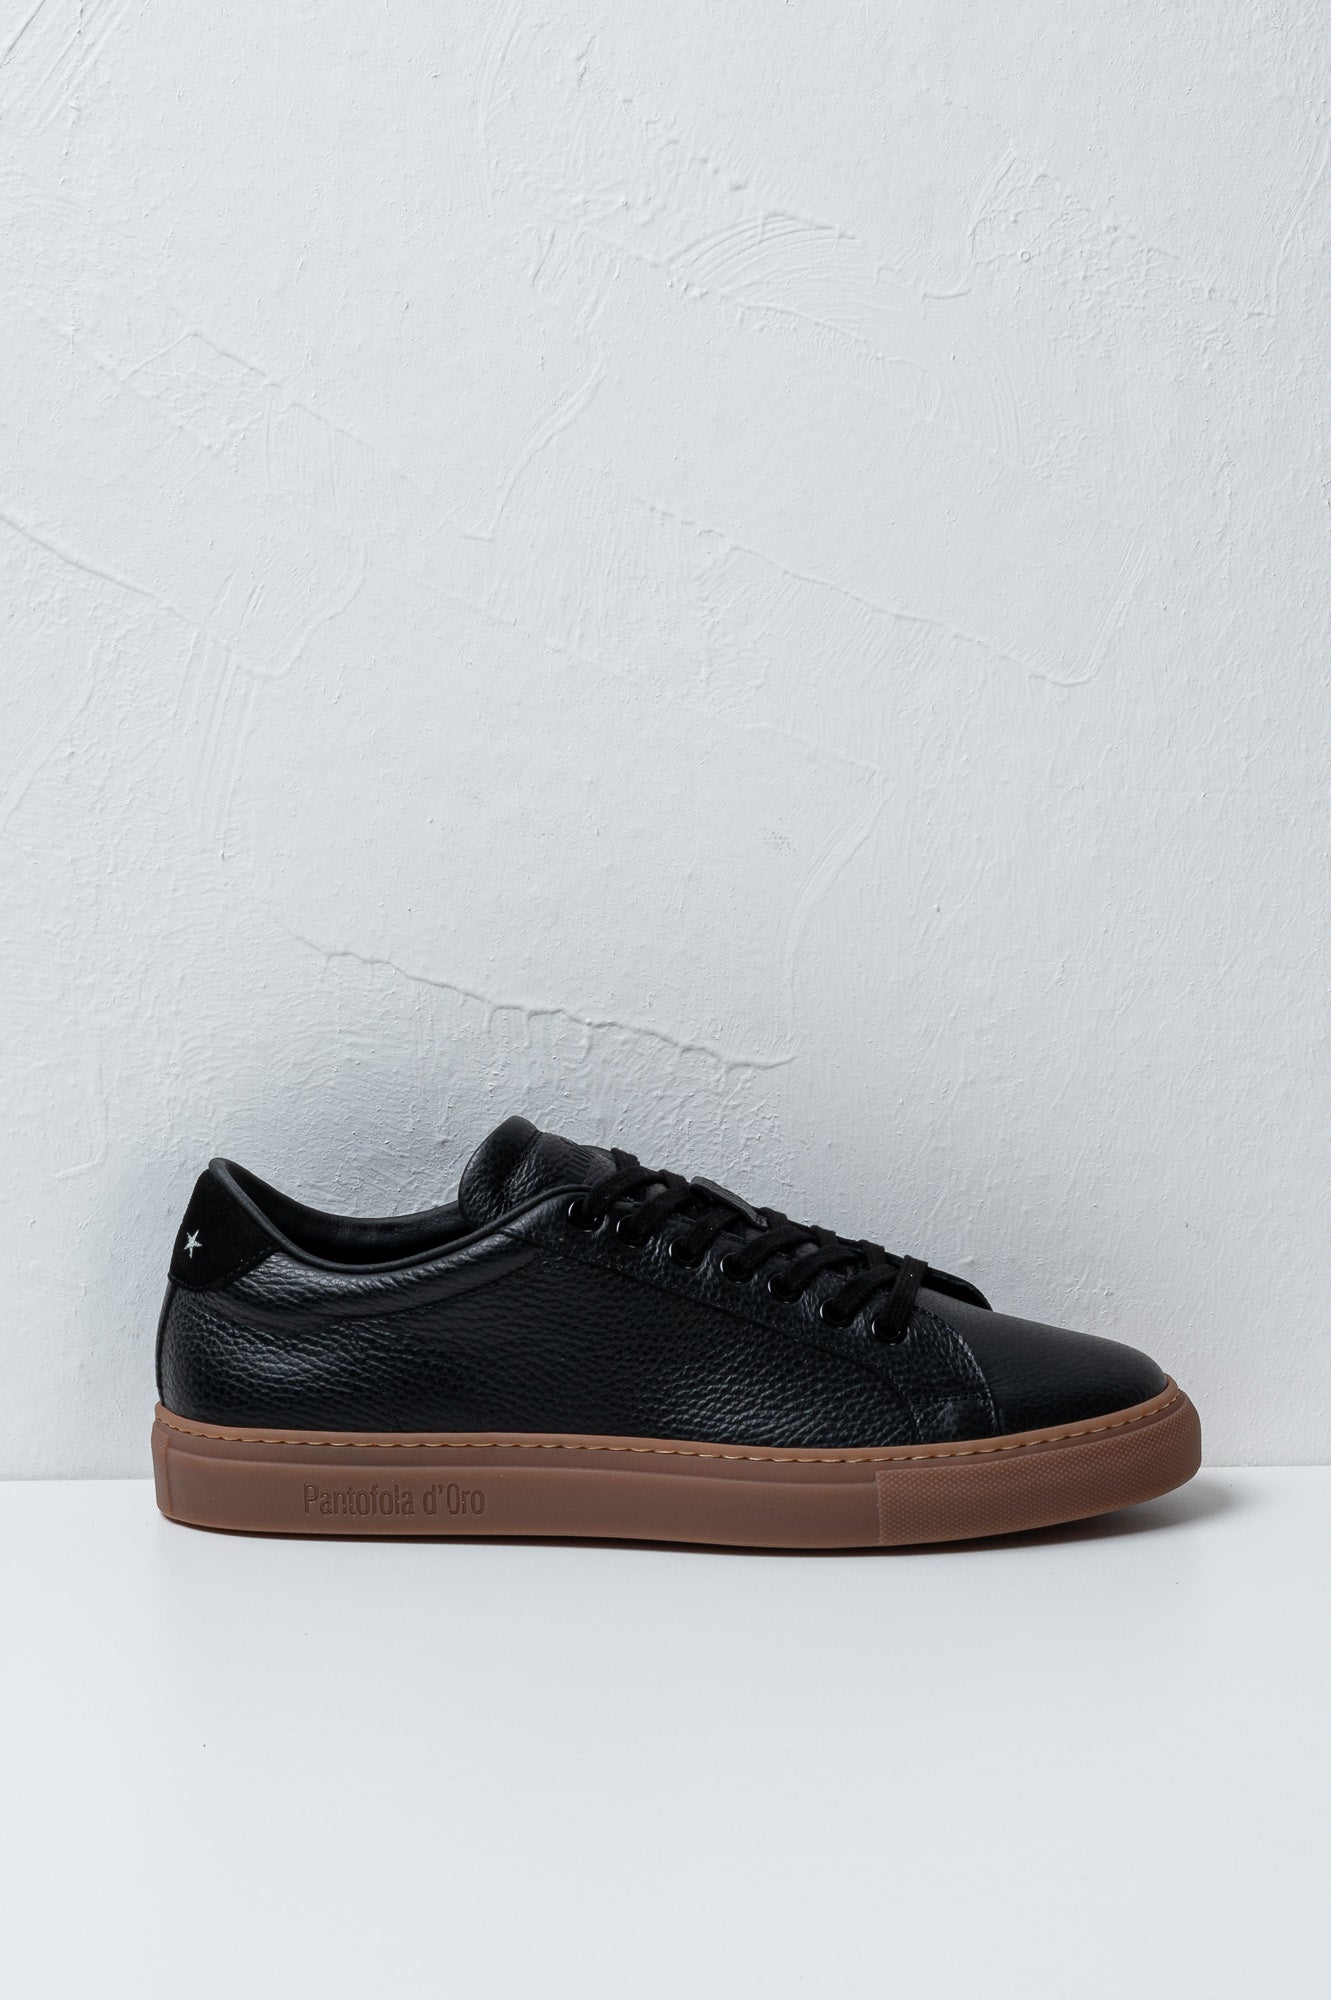 Pantofola d'Oro Top Spin Leather and Suede Sneakers